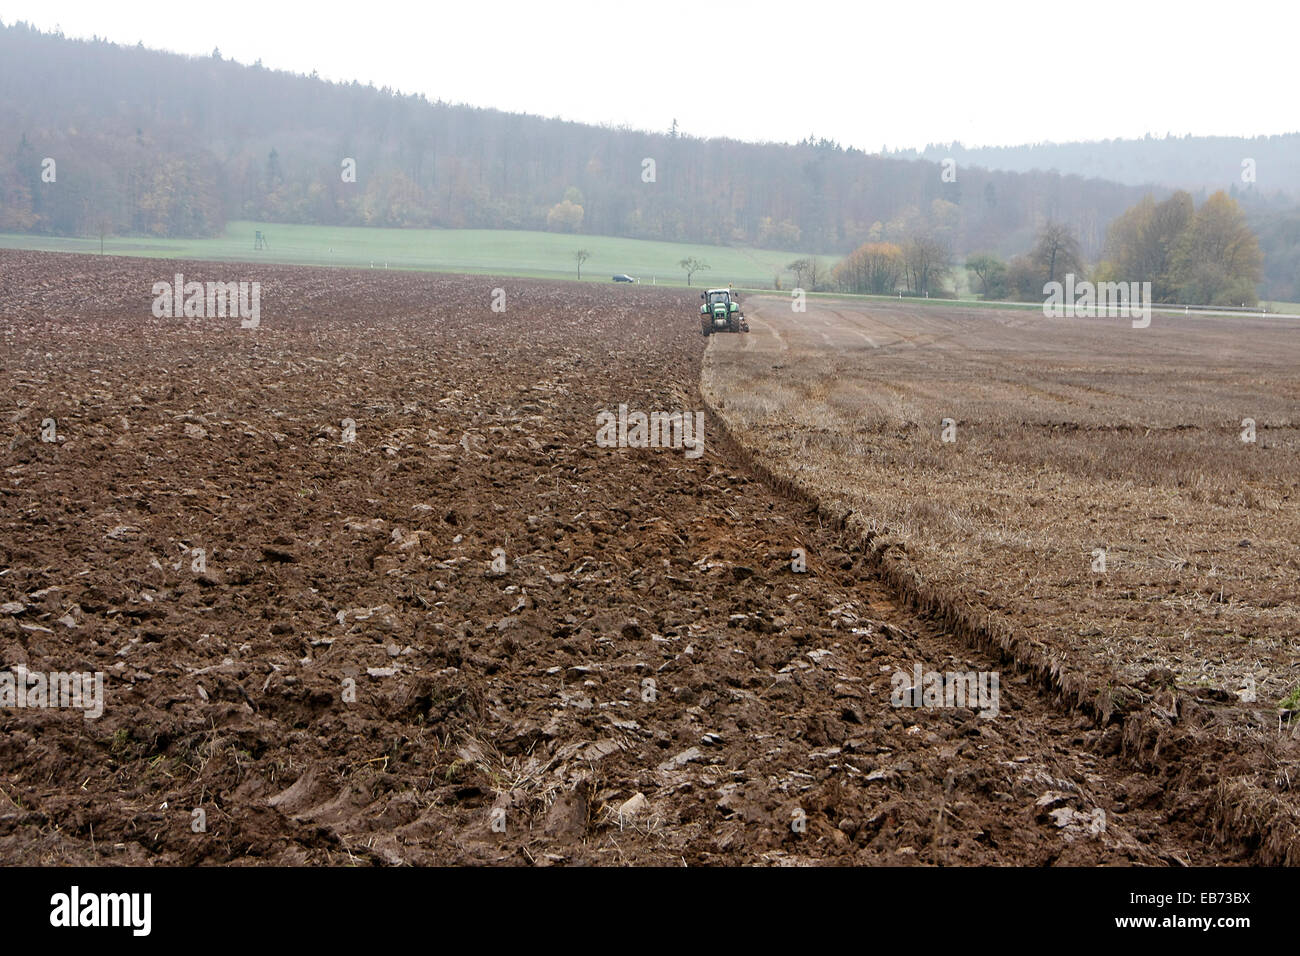 Plowing a field in Reichenhausen in the Biosphere Reserve of rhoen. Processing of agricultural land takes place in this environment in terms of conservation and sustainability. Photo: Klaus Nowottnick Date: 11/04/2014 Stock Photo